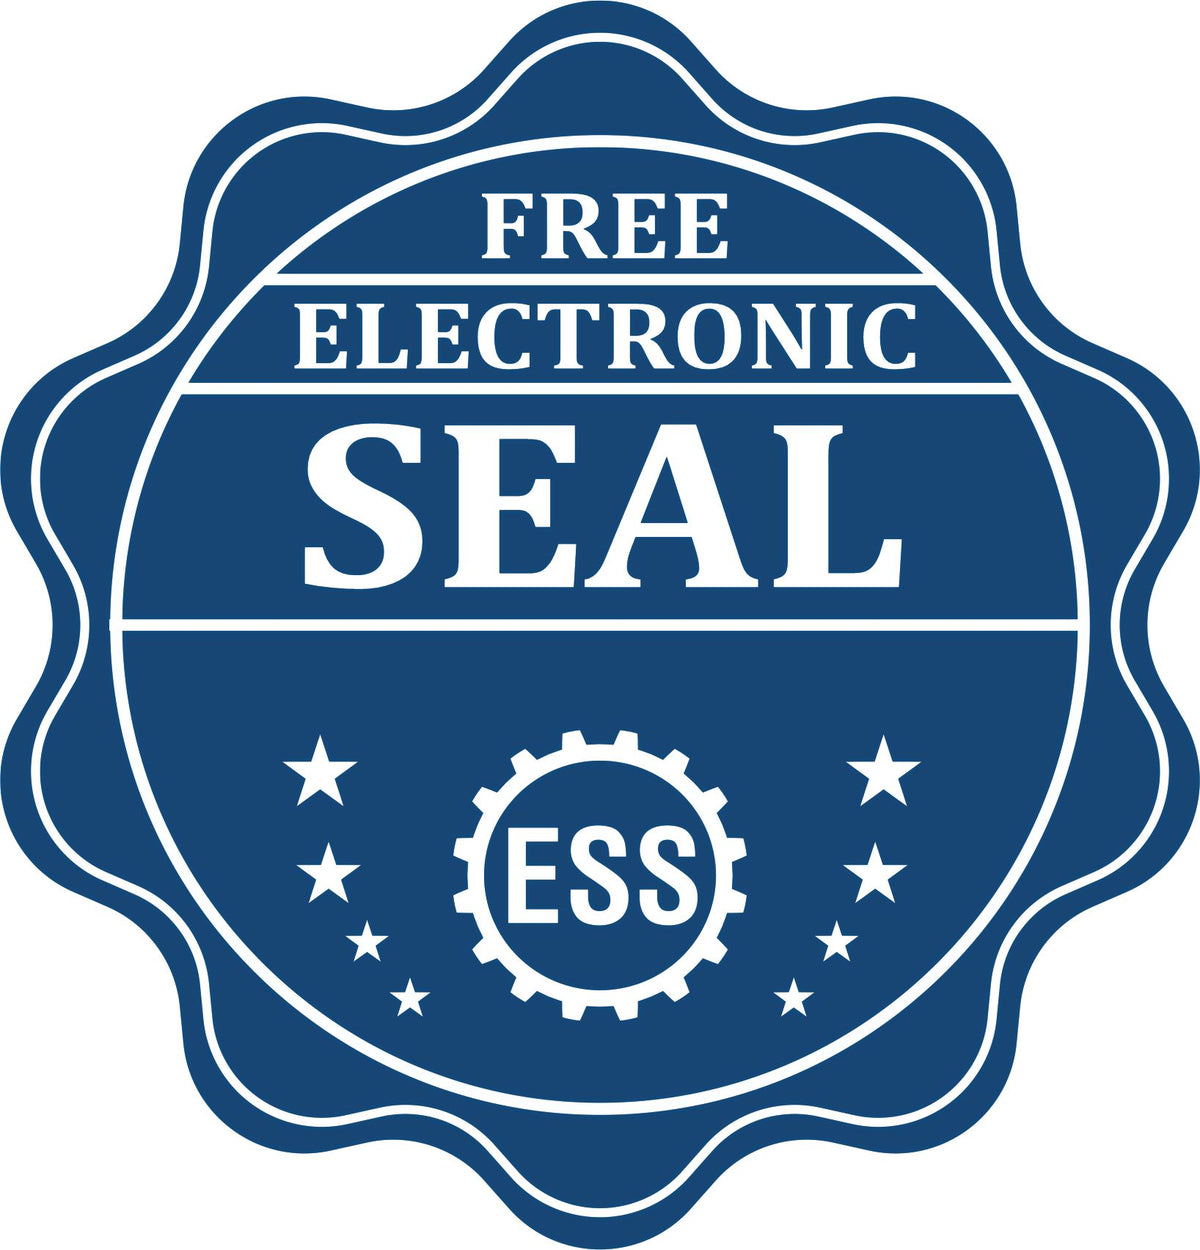 A badge showing a free electronic seal for the Handheld Arizona Architect Seal Embosser with stars and the ESS gear on the emblem.